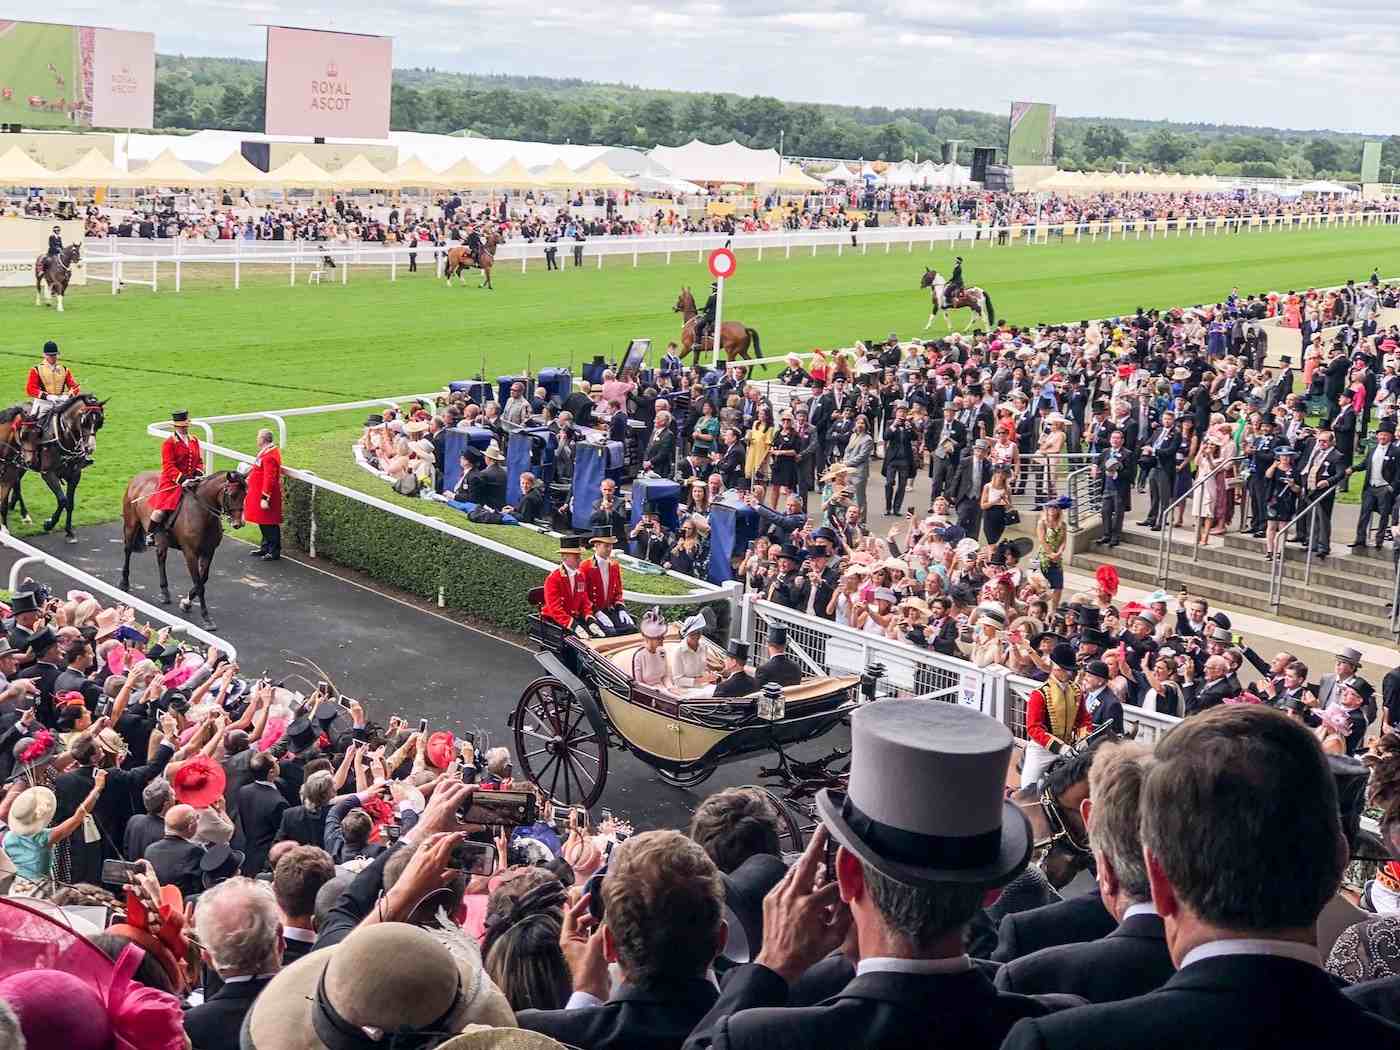 Royal family arrive at Royal Ascot including Meghan Markle & Prince Harry